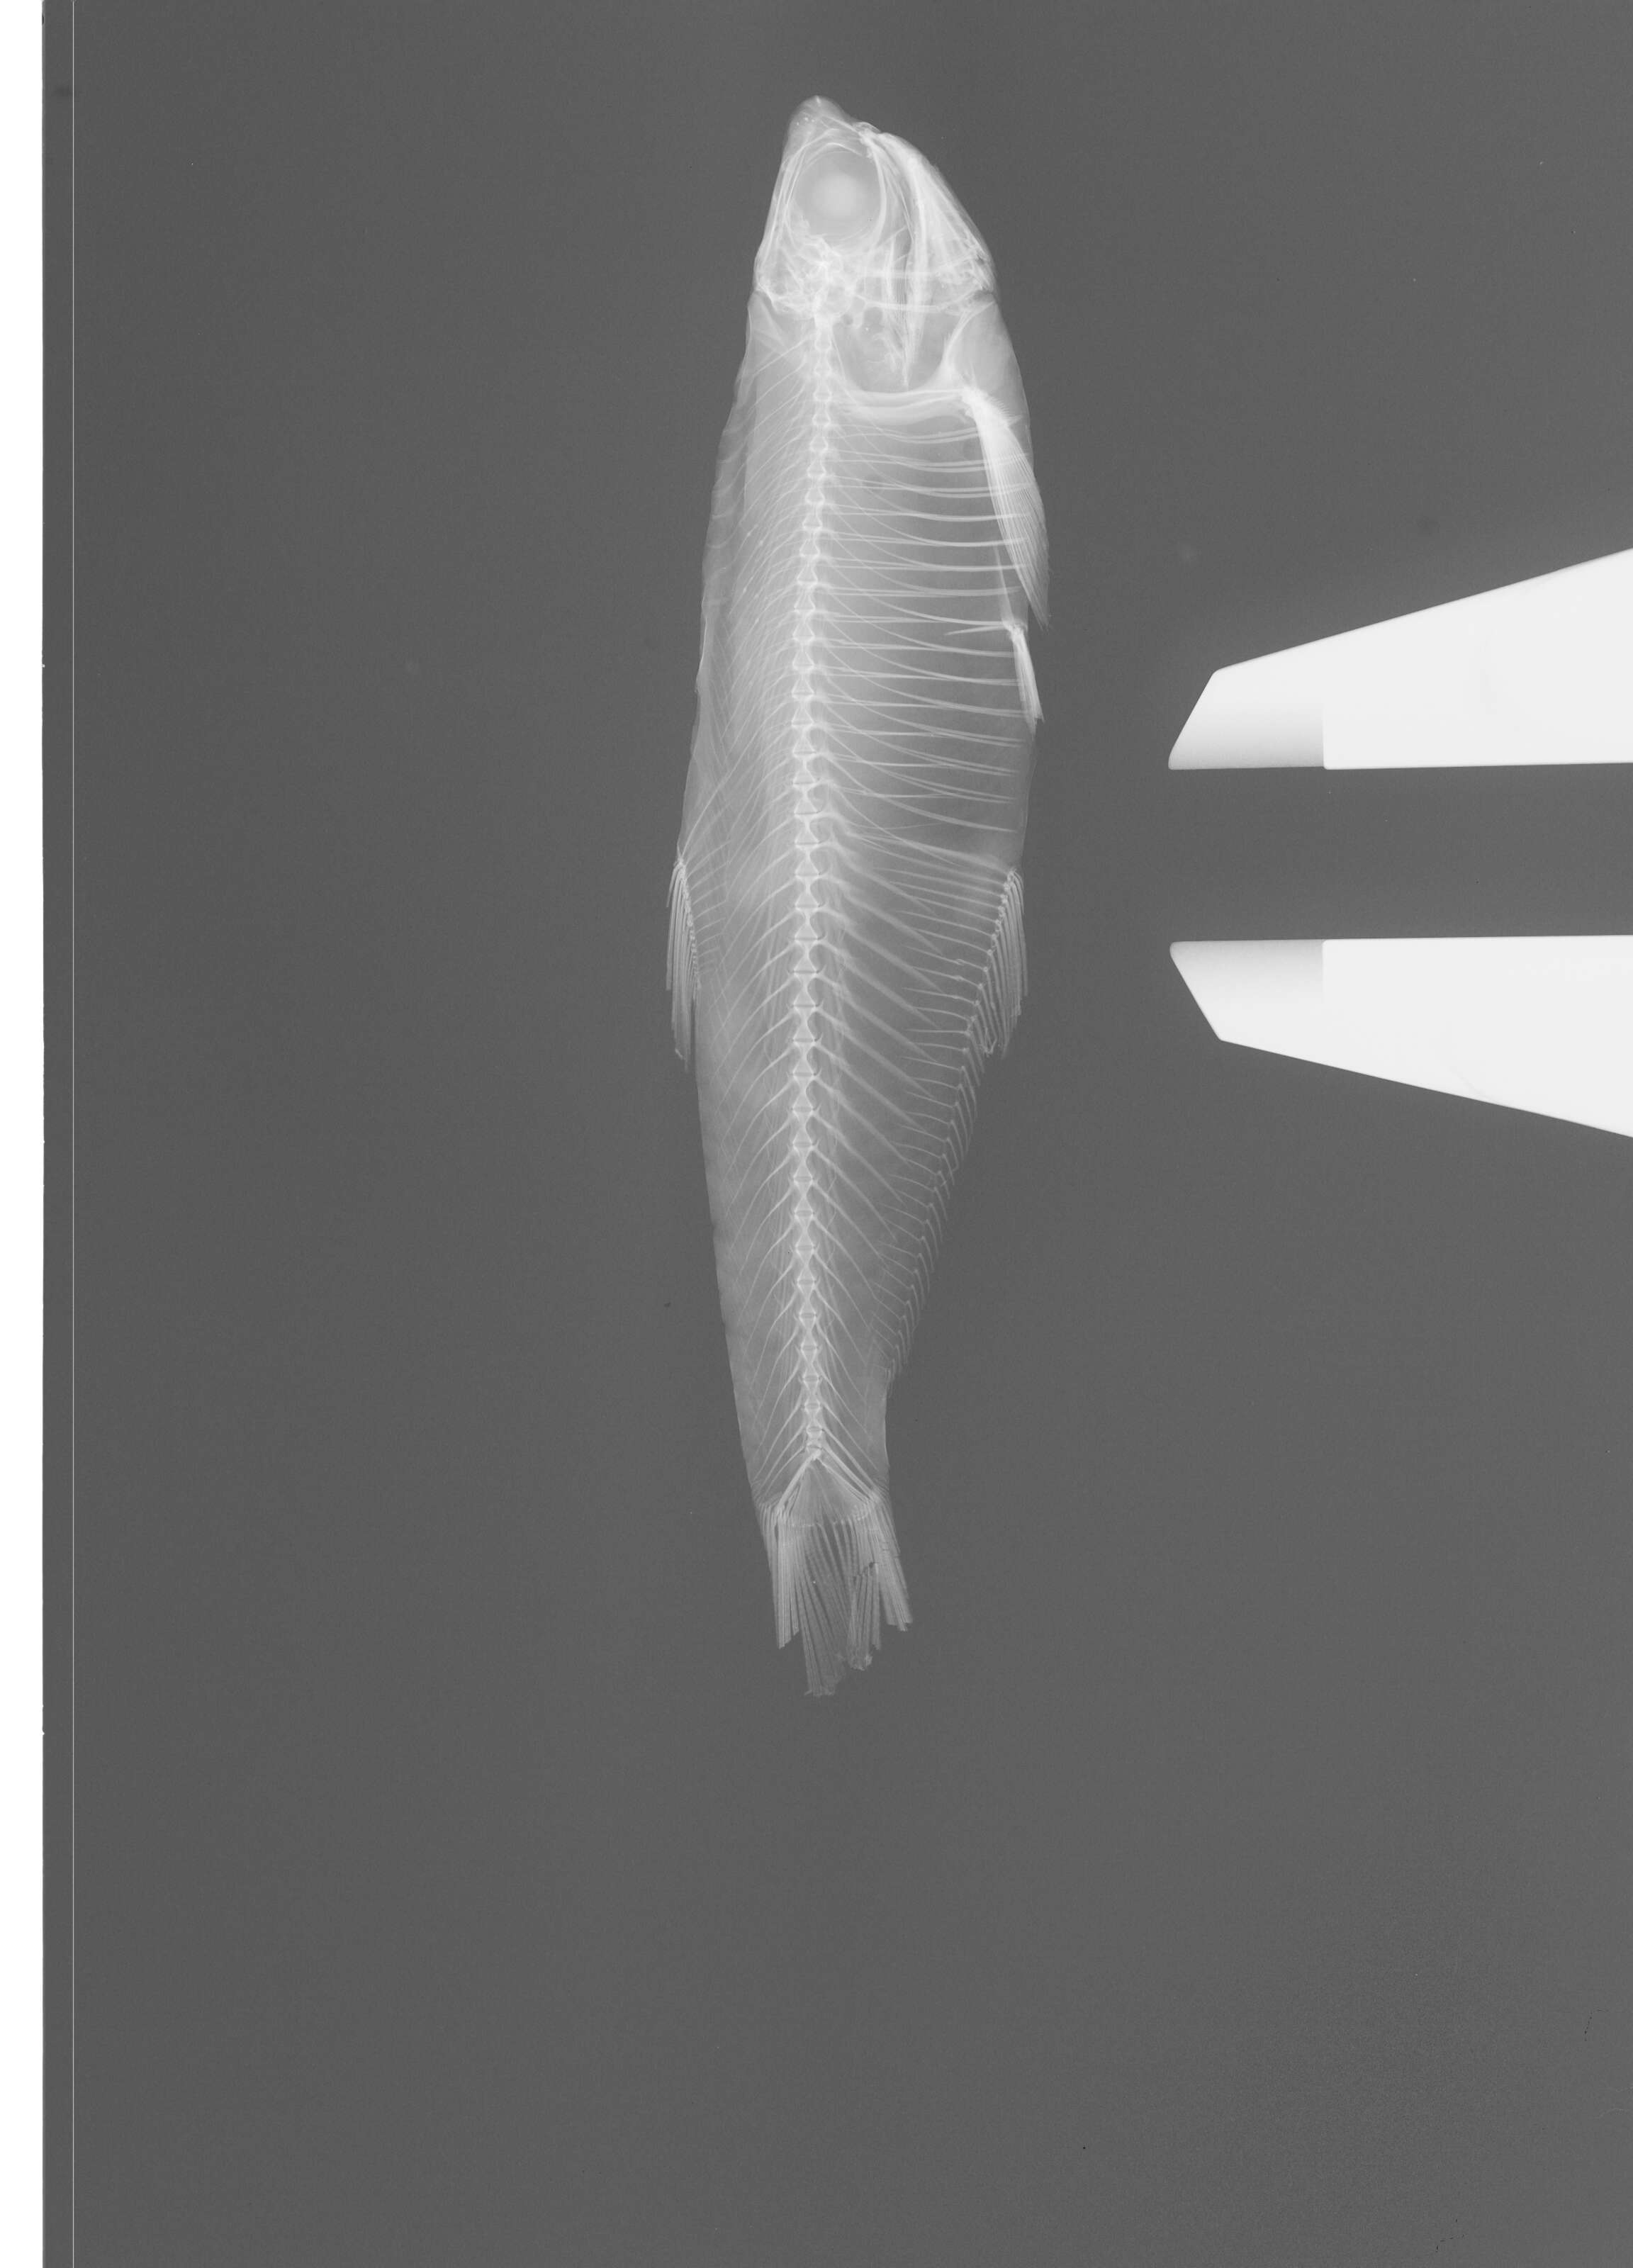 Image of Longfin Pacific anchovy